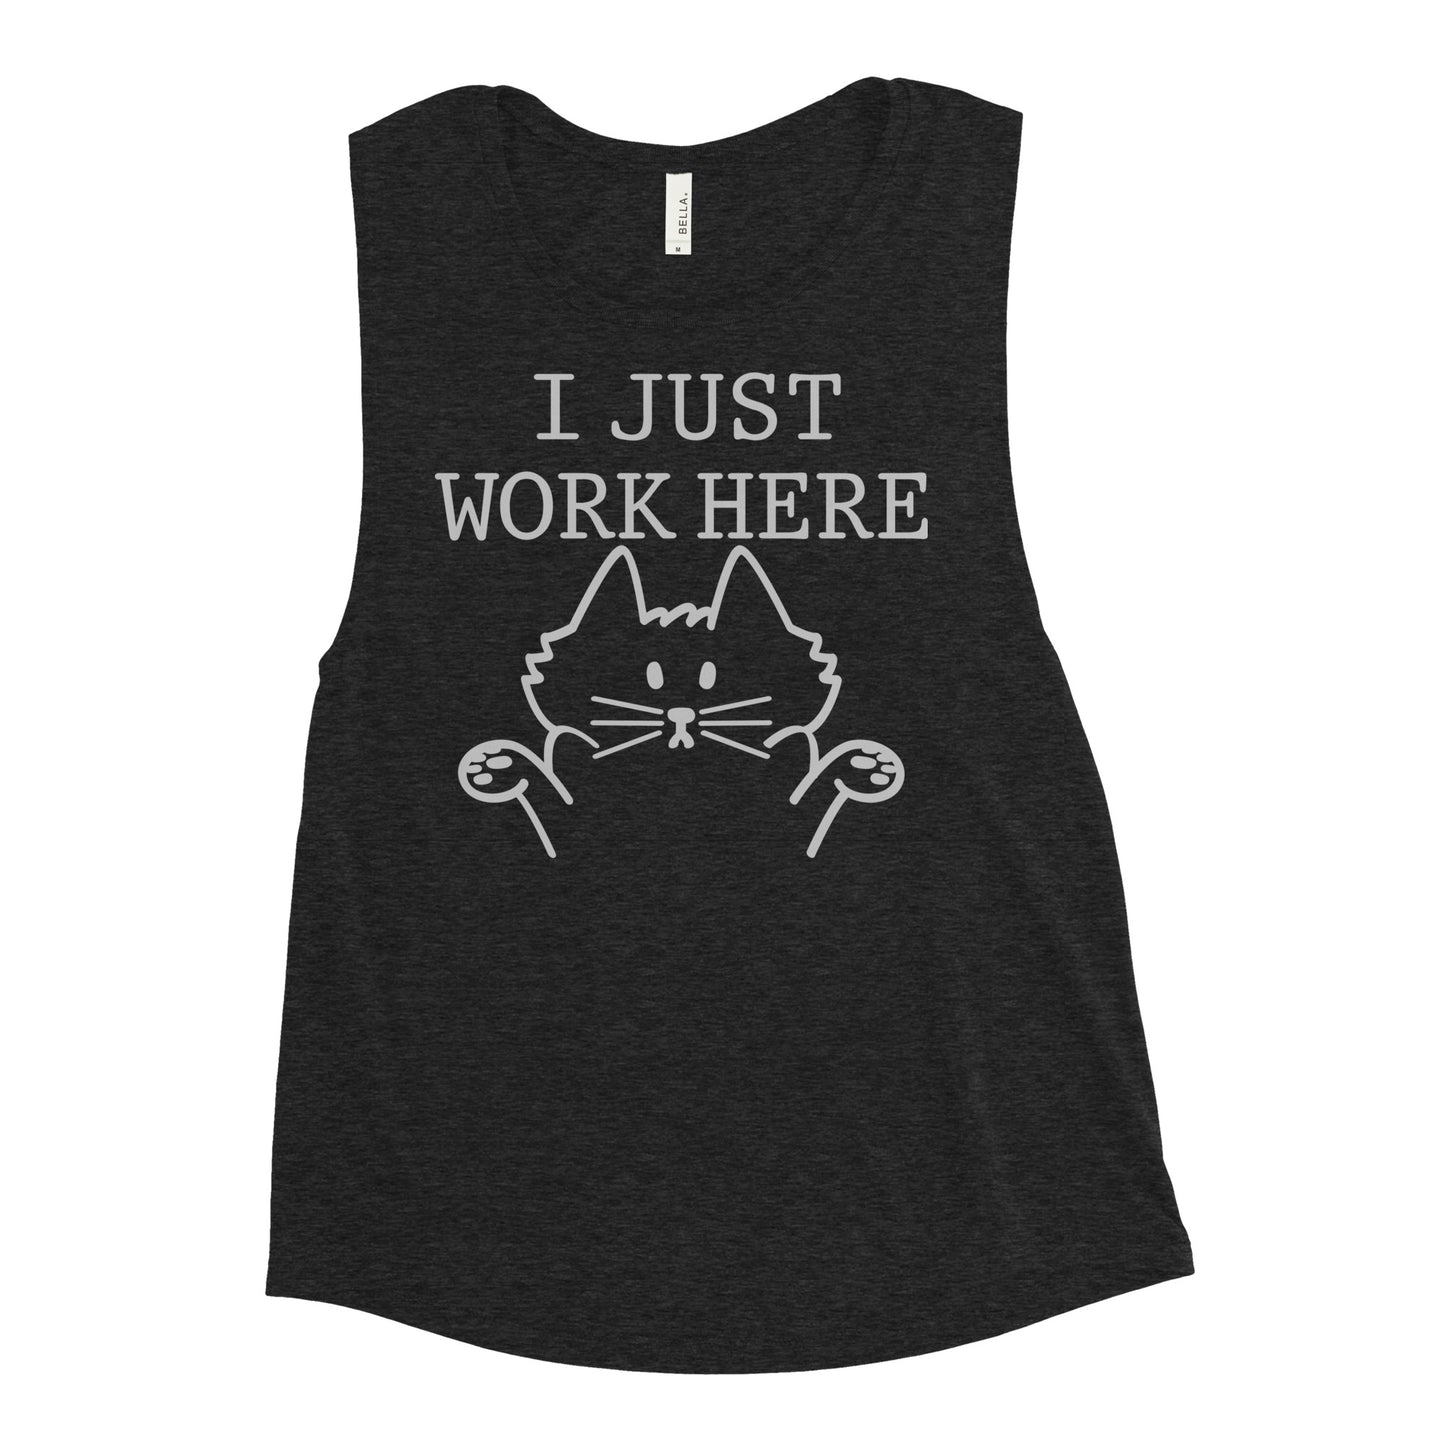 I Just Work Here Women's Muscle Tank